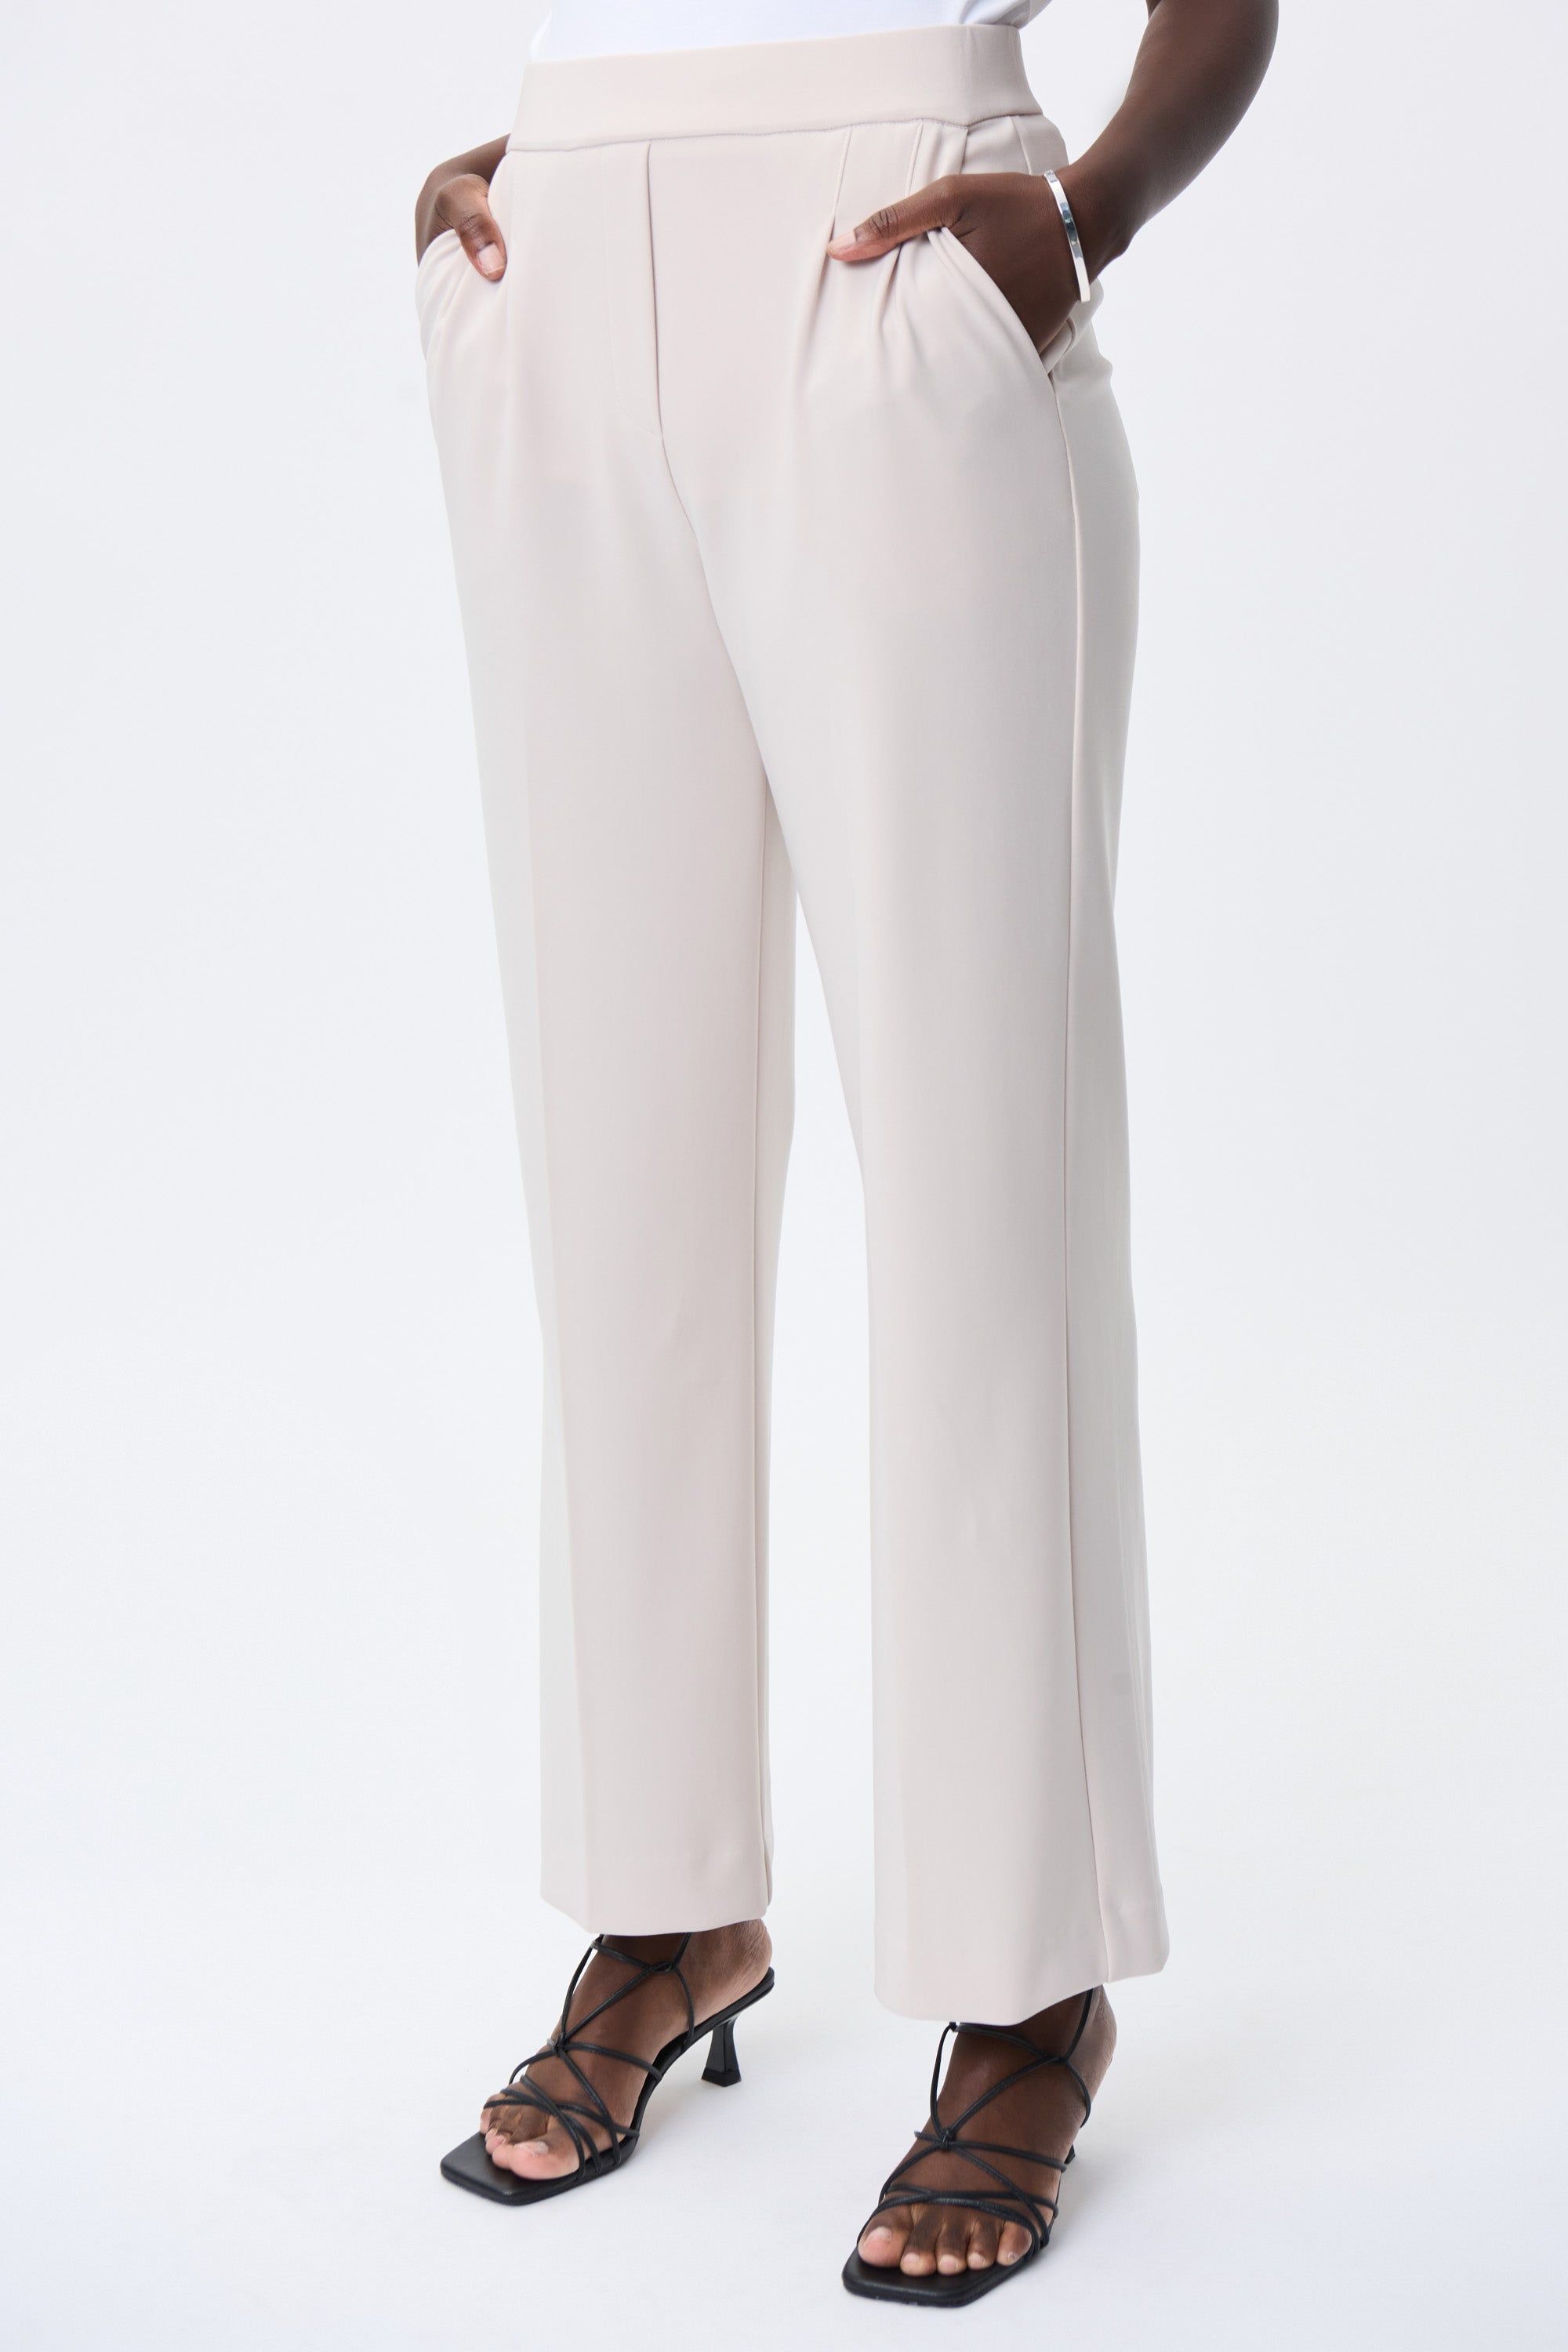 Joseph Ribkoff Pleated Pant - Style 231136, front